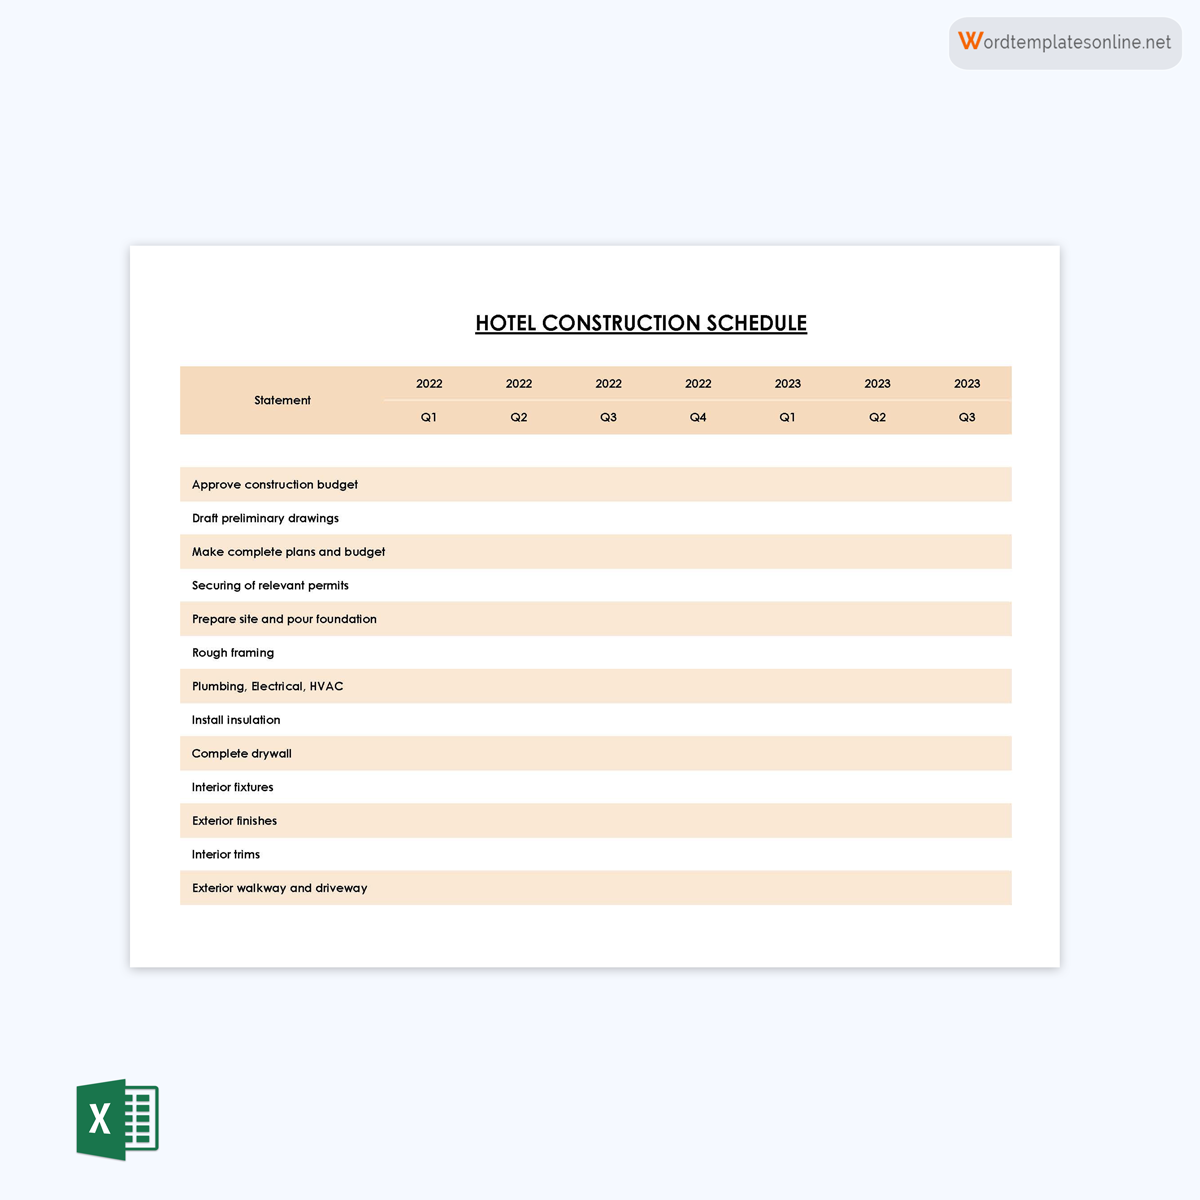 Free Printable Hotel Construction Schedule Template 01 as Excel Sheet